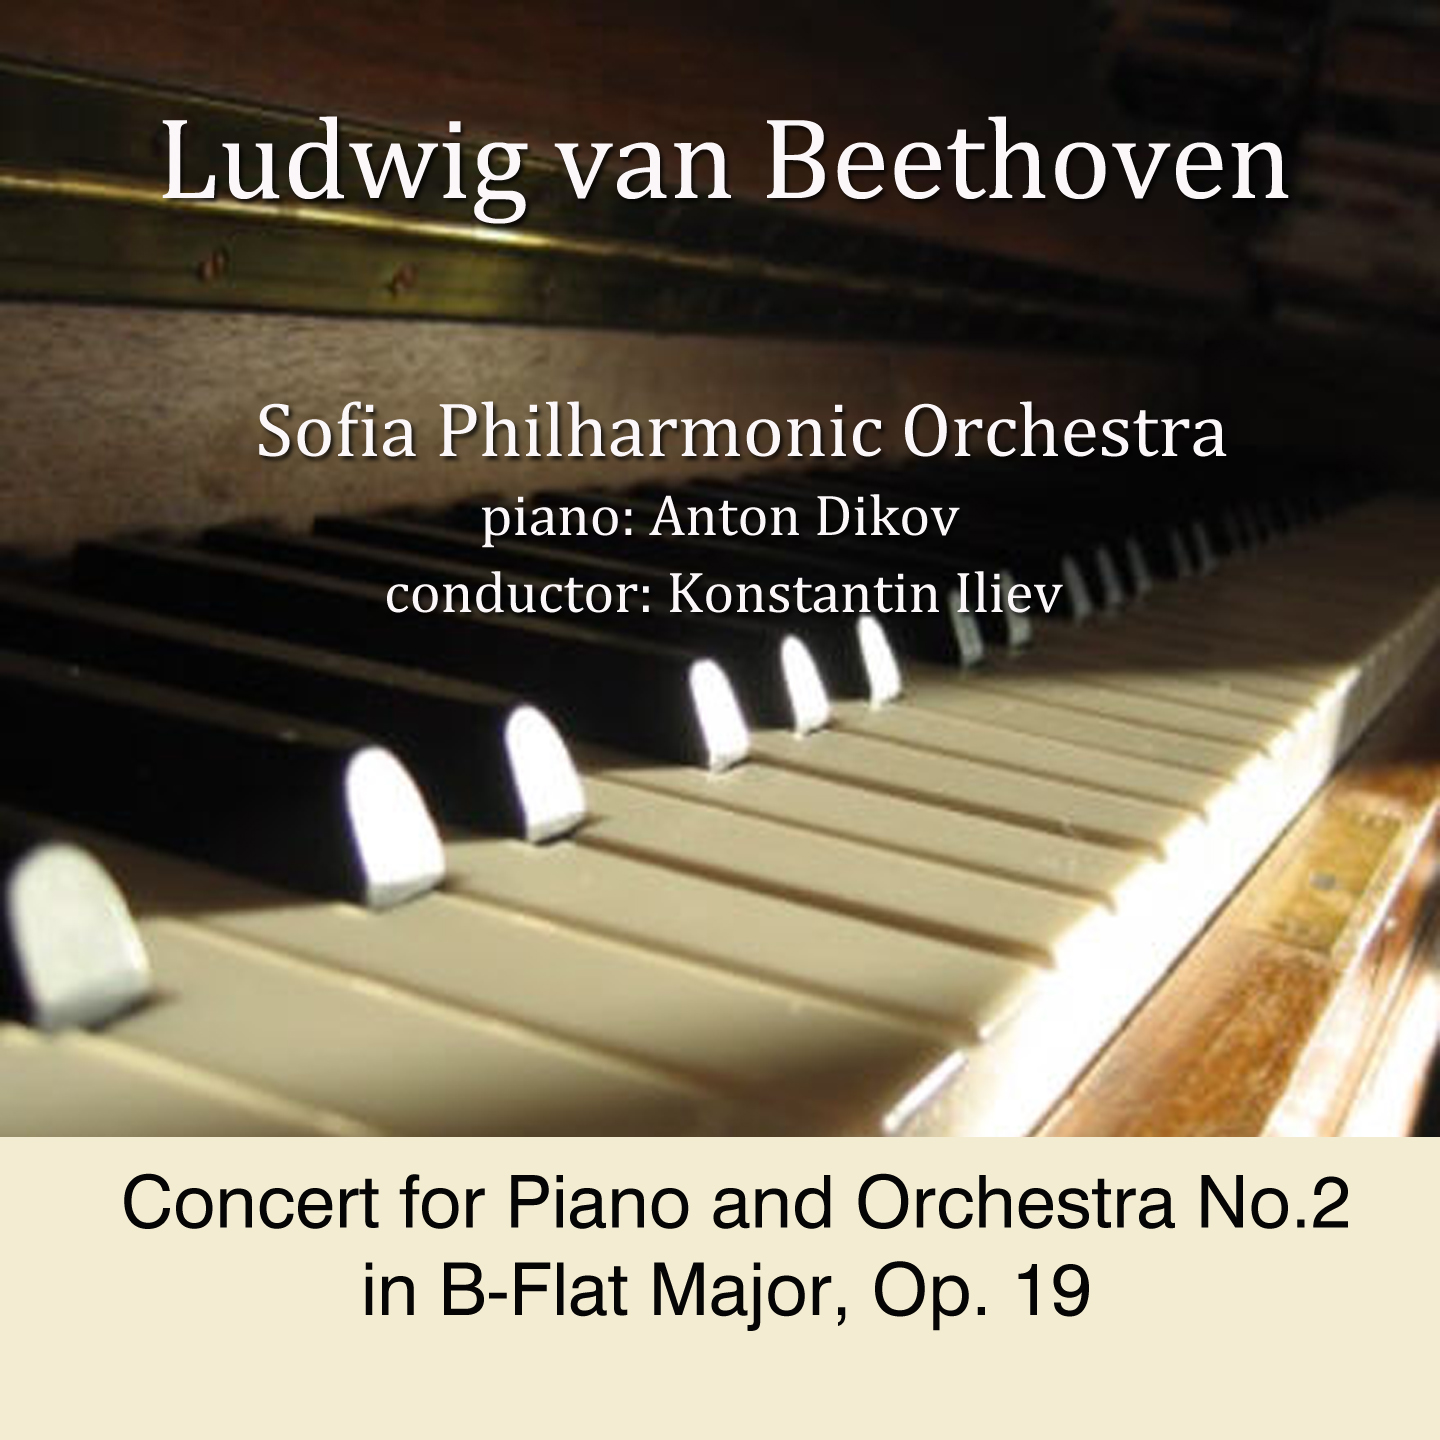 Concert for Piano and Orchestra No.2 in B-Flat Major, Op. 19: 2. Adagio